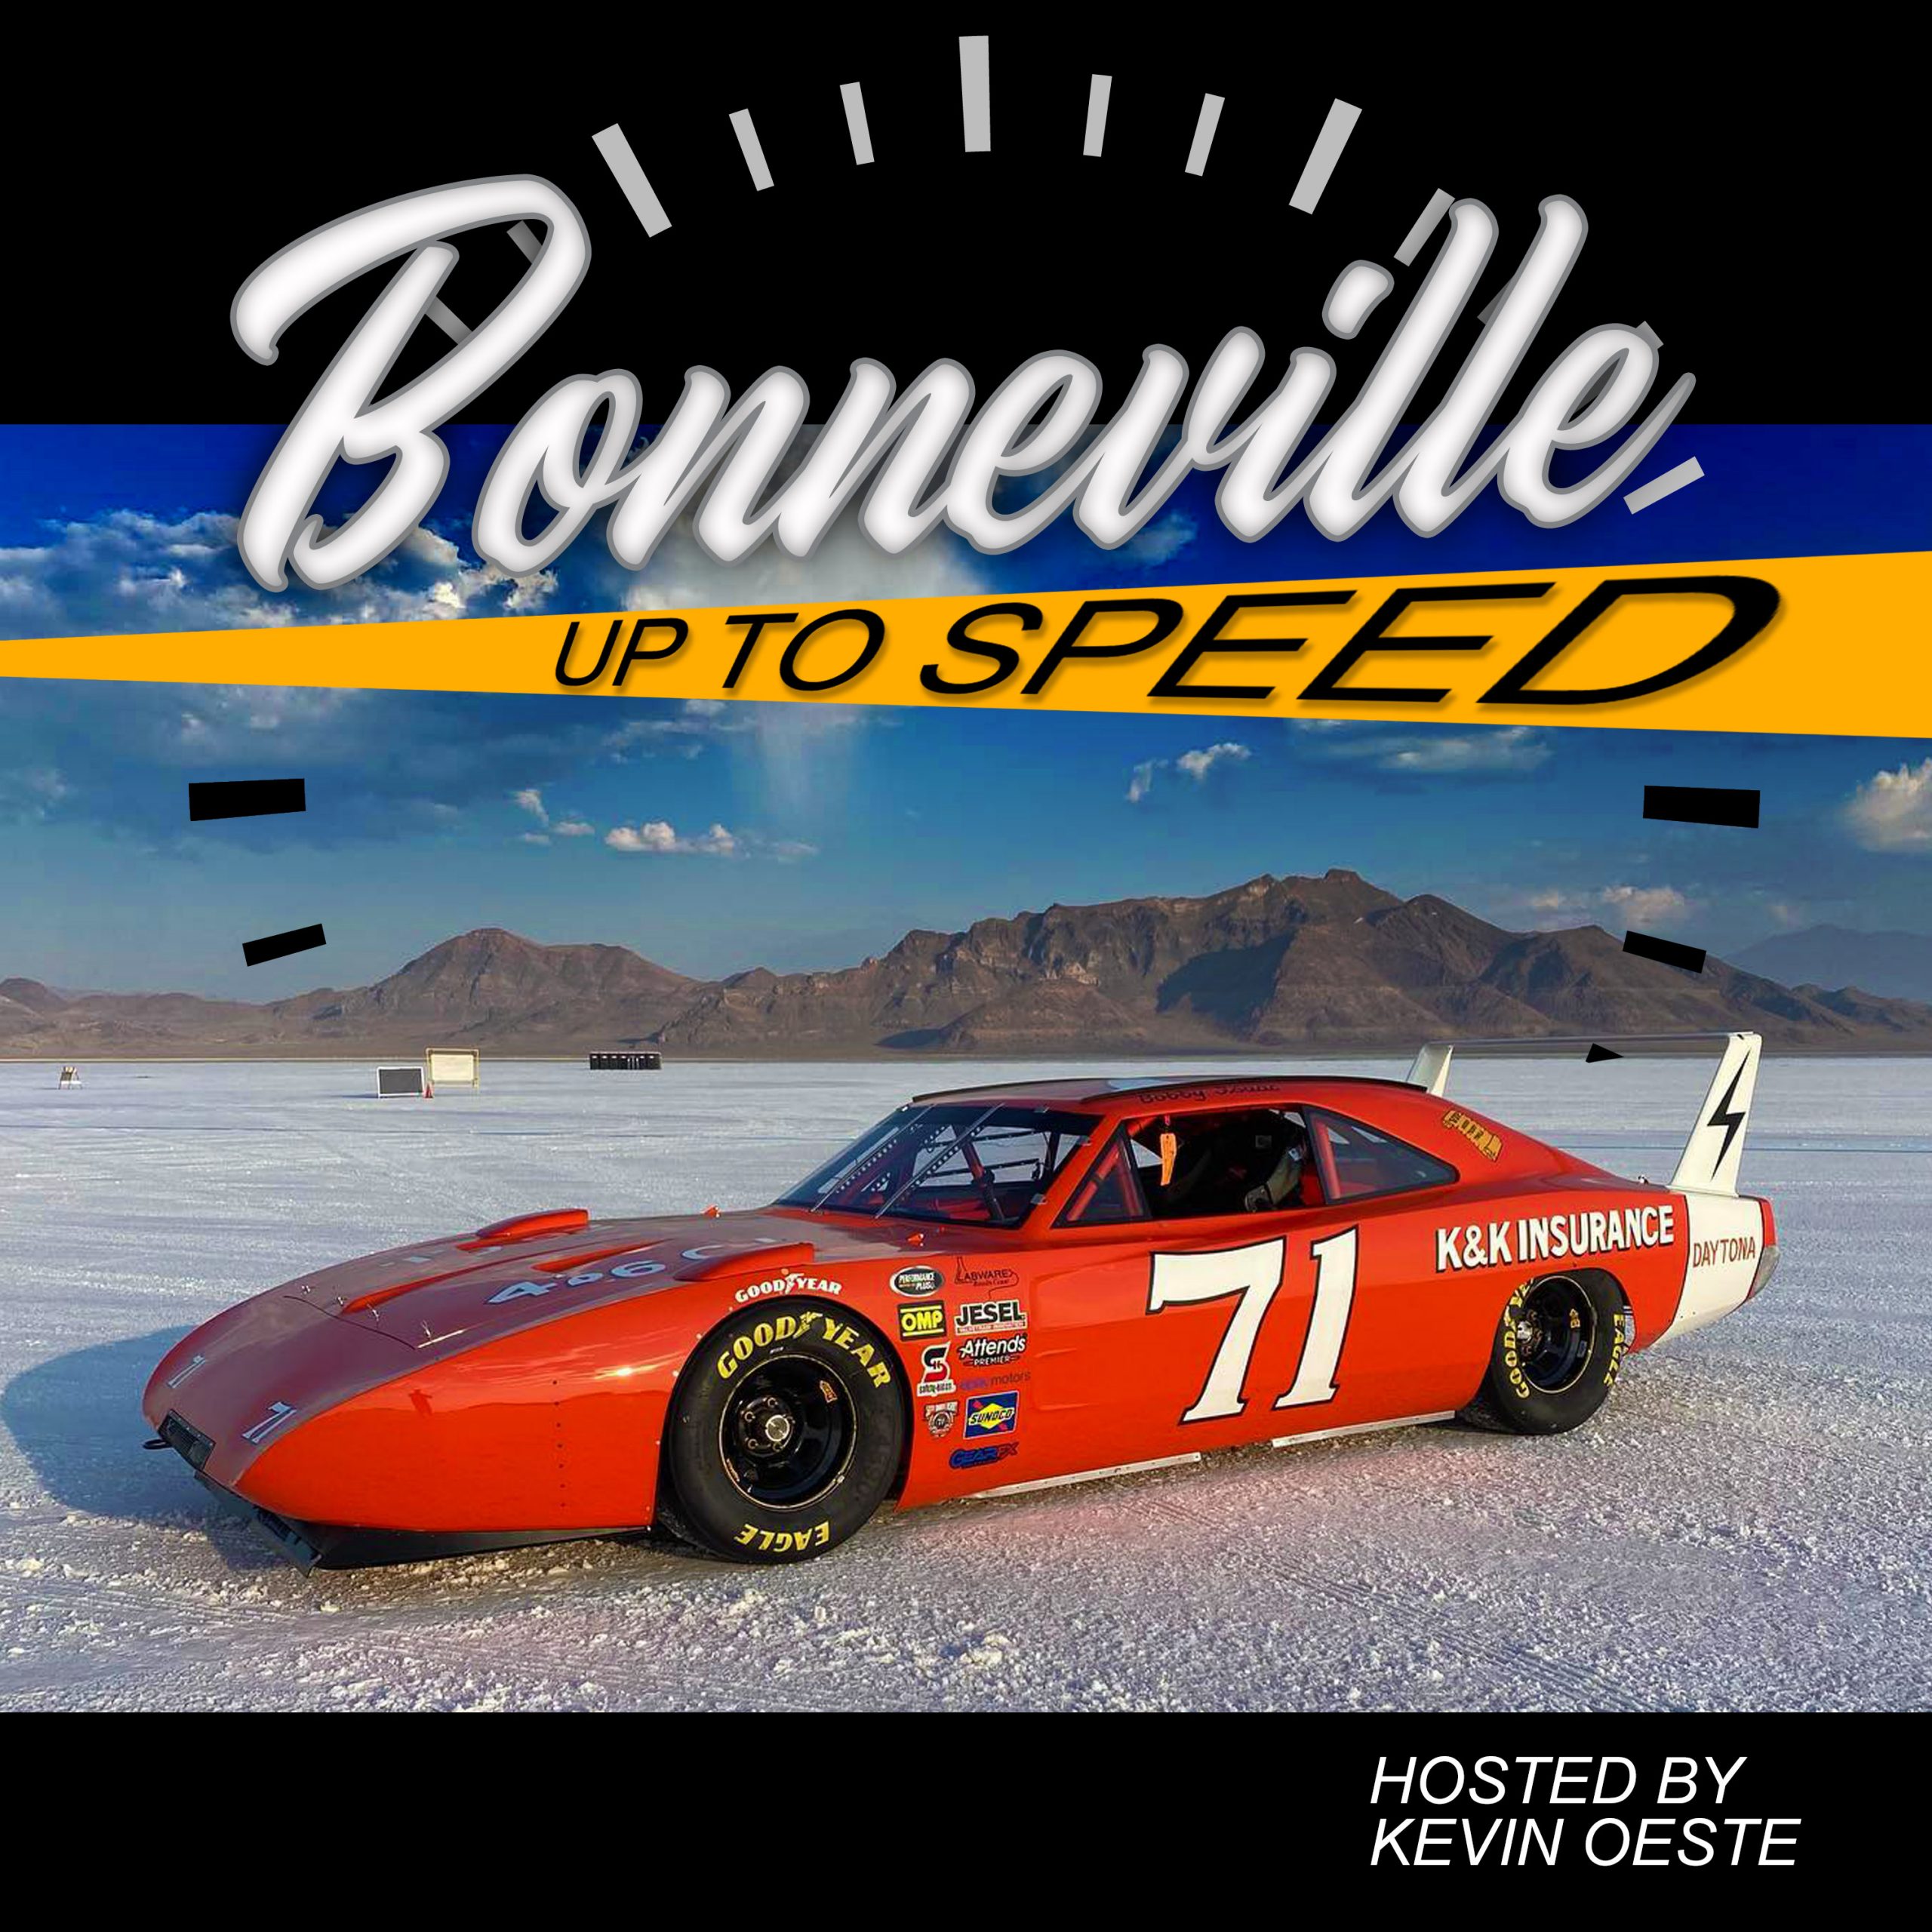 From NASCAR to the Salt - Aaron Brown and the Garage Shop on the Bonneville Up To Speed Podcast!